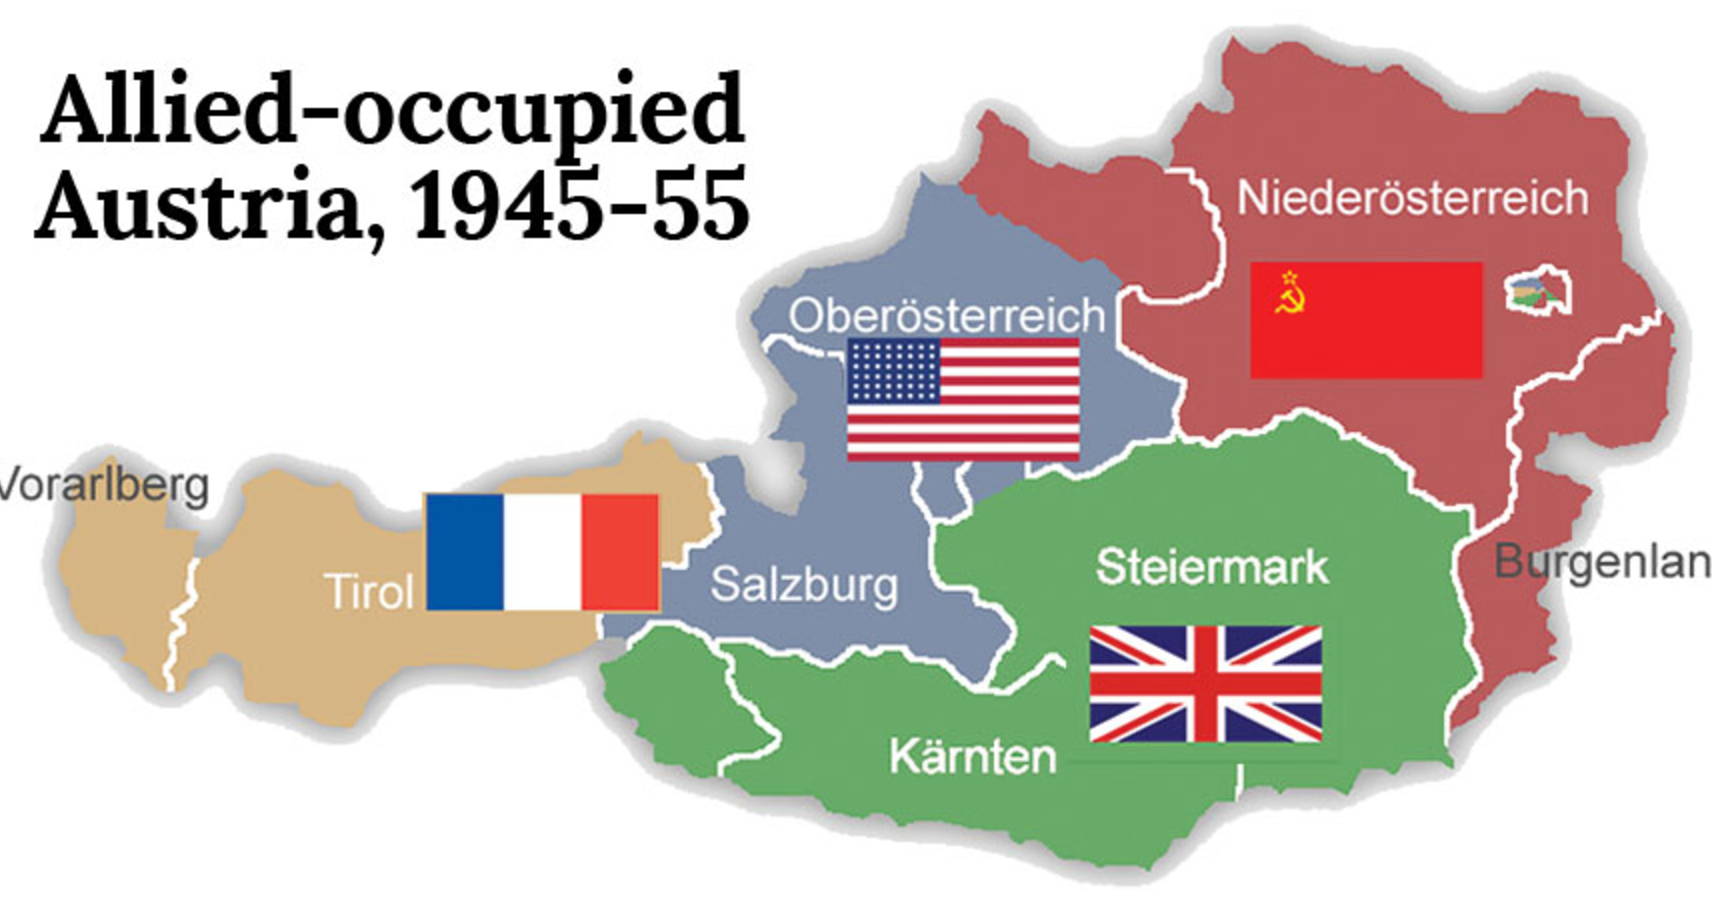 Austria divided between the Allied powers between 1945-1955